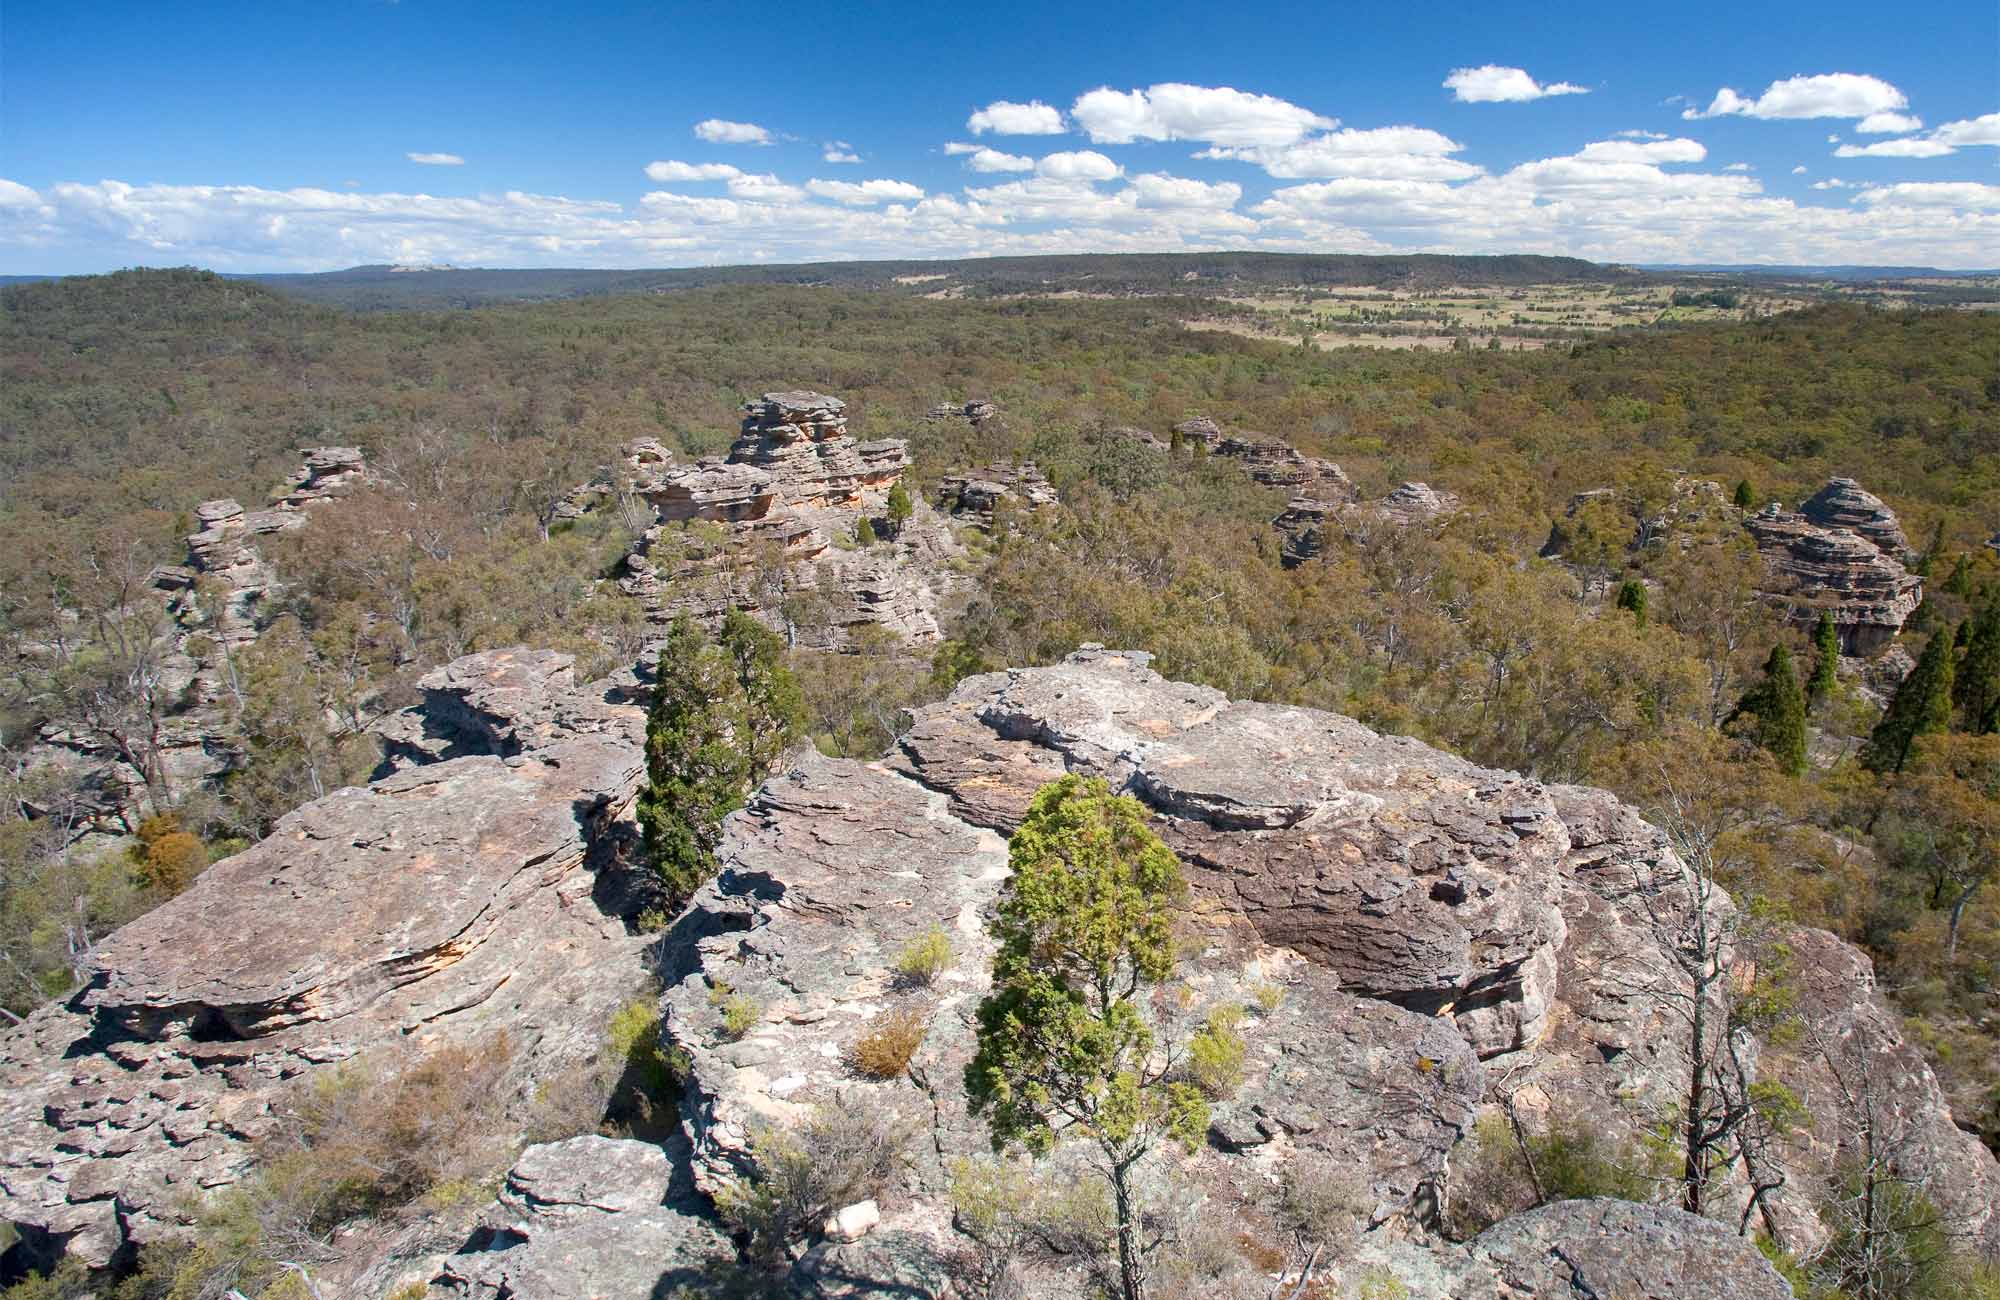 Castle Rocks walking track, Munghorn Nature Reserve. Photo: Nick Cubbin/NSW Government